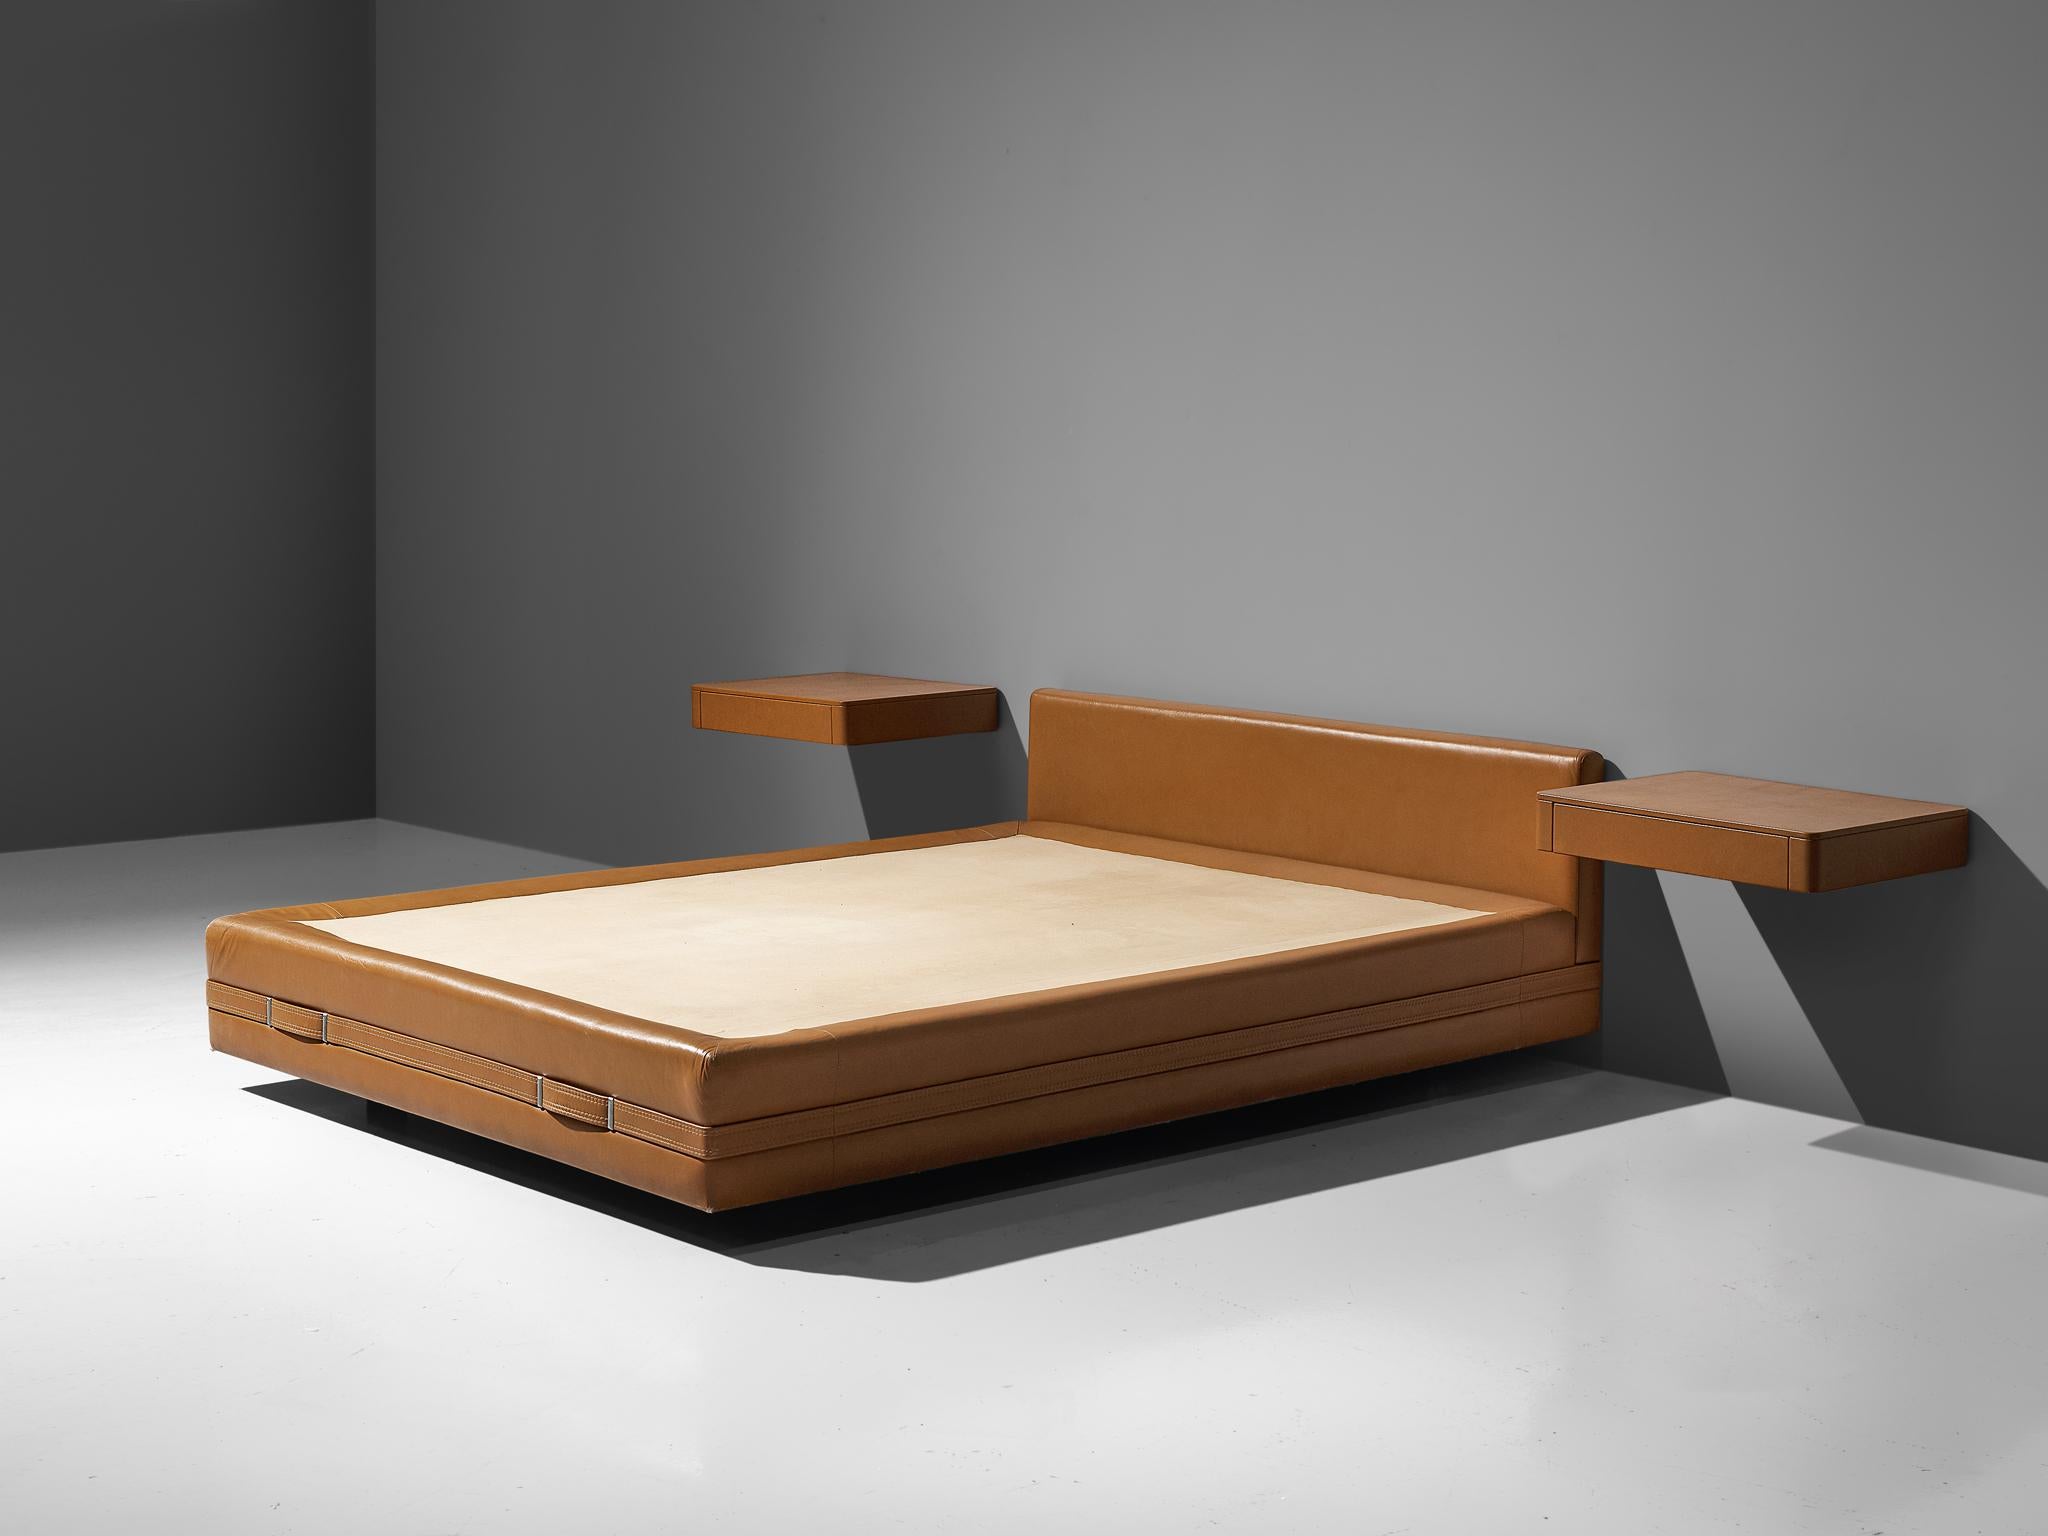 Osvaldo Borsani, queensize bed, cognac leather, metal, Italy, circa 1975.

This Italian bed includes bedframe with headboard, two nightstands and two build in night lights. True example of postmodern design by means of the material used. The